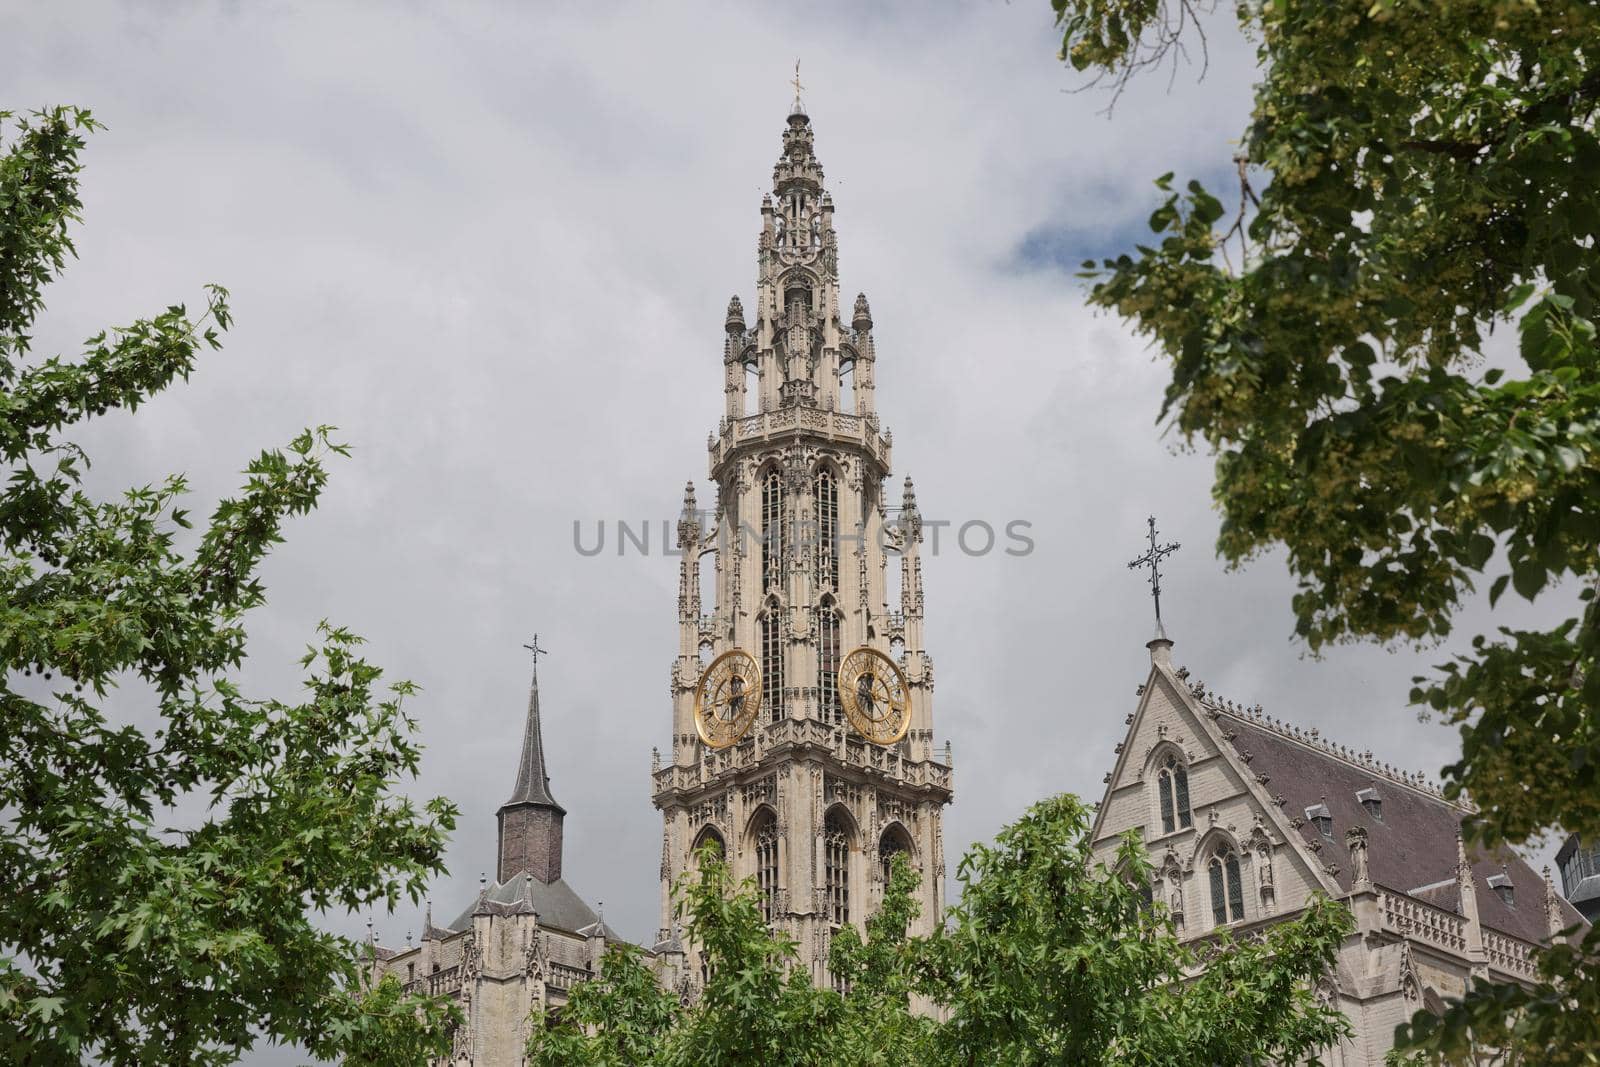 View of a cathedral of our lady in Antwerp Belgium.